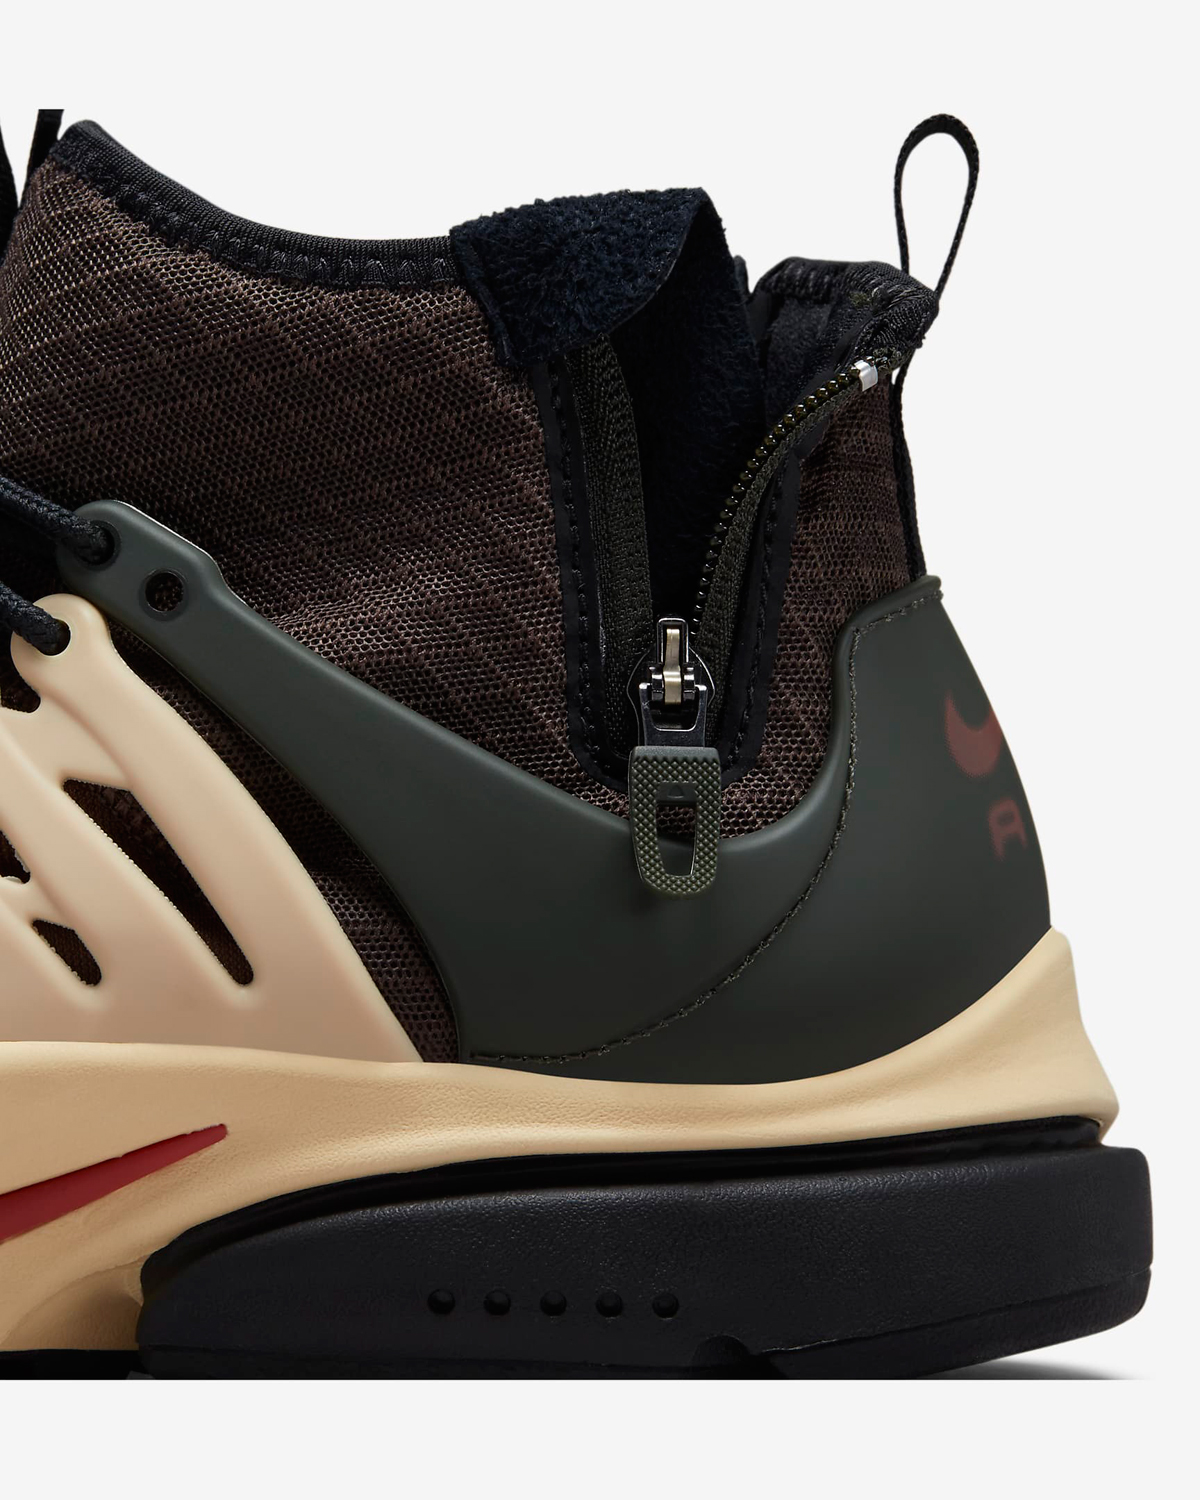 nike-air-presto-mid-utility-baroque-brown-sesame-sequoia-canyon-rust-release-date-9